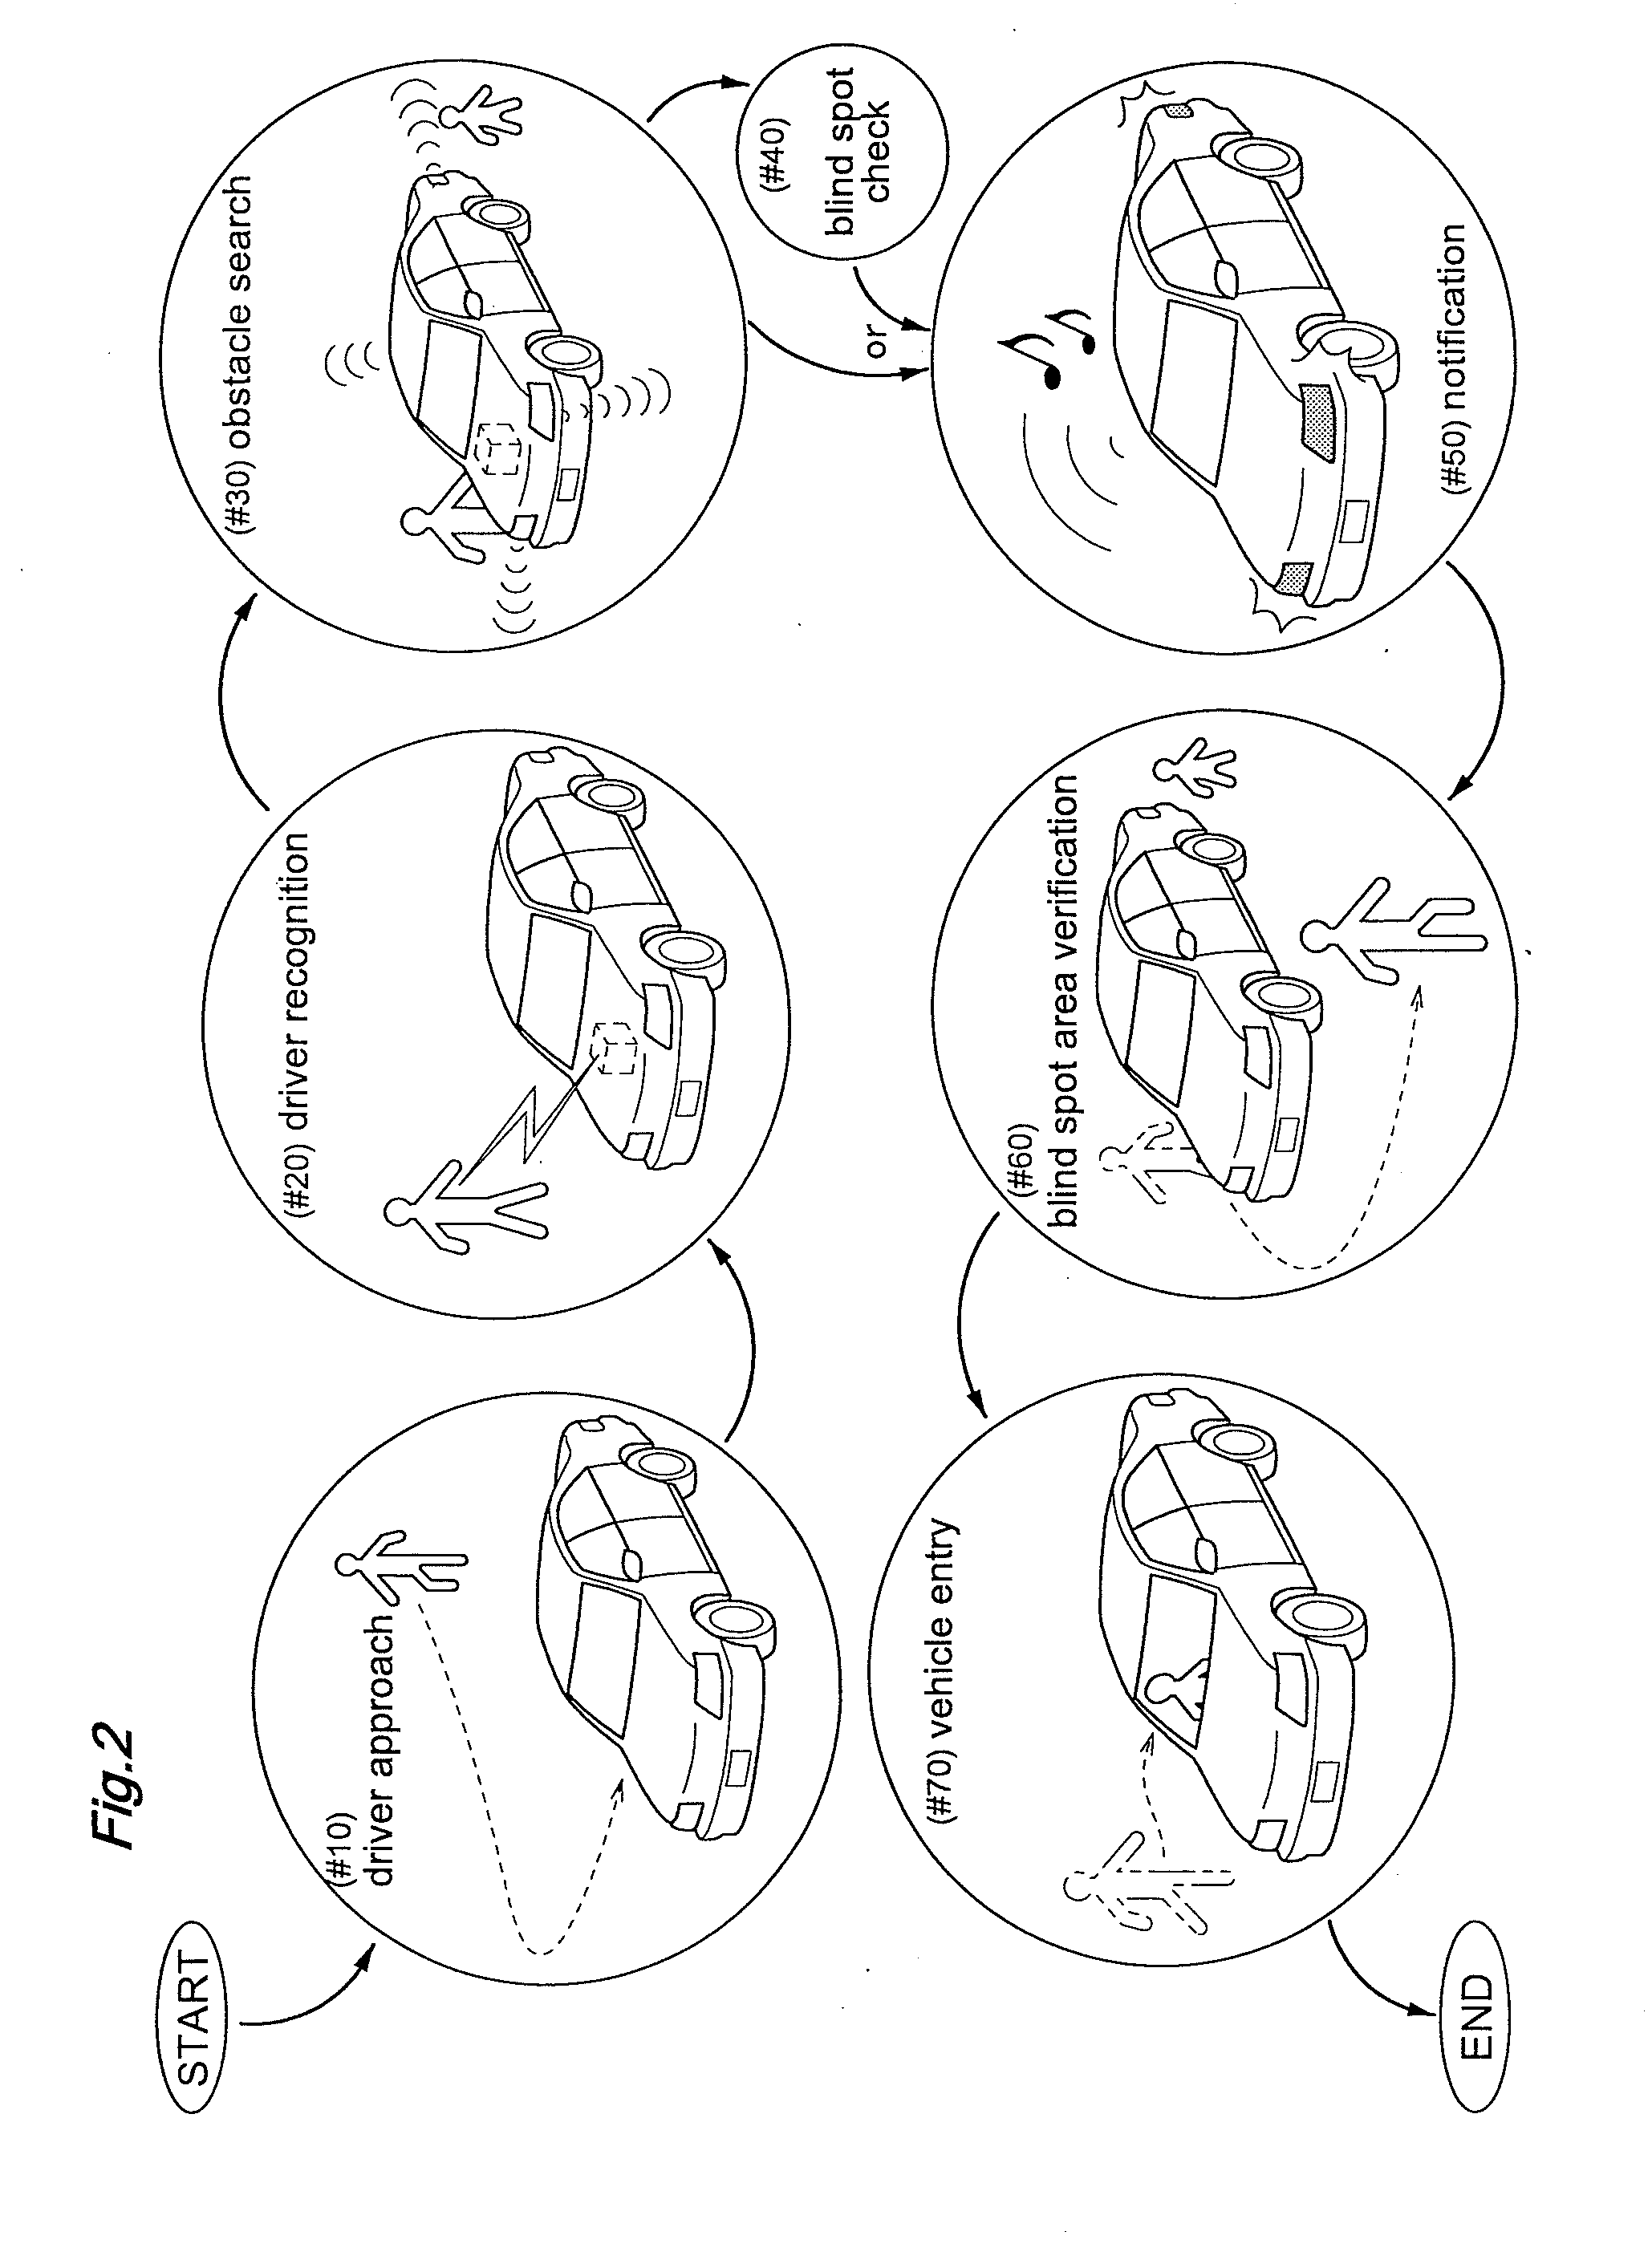 Method of monitoring vehicle surroundings, and apparatus for monitoring vehicle surroundings